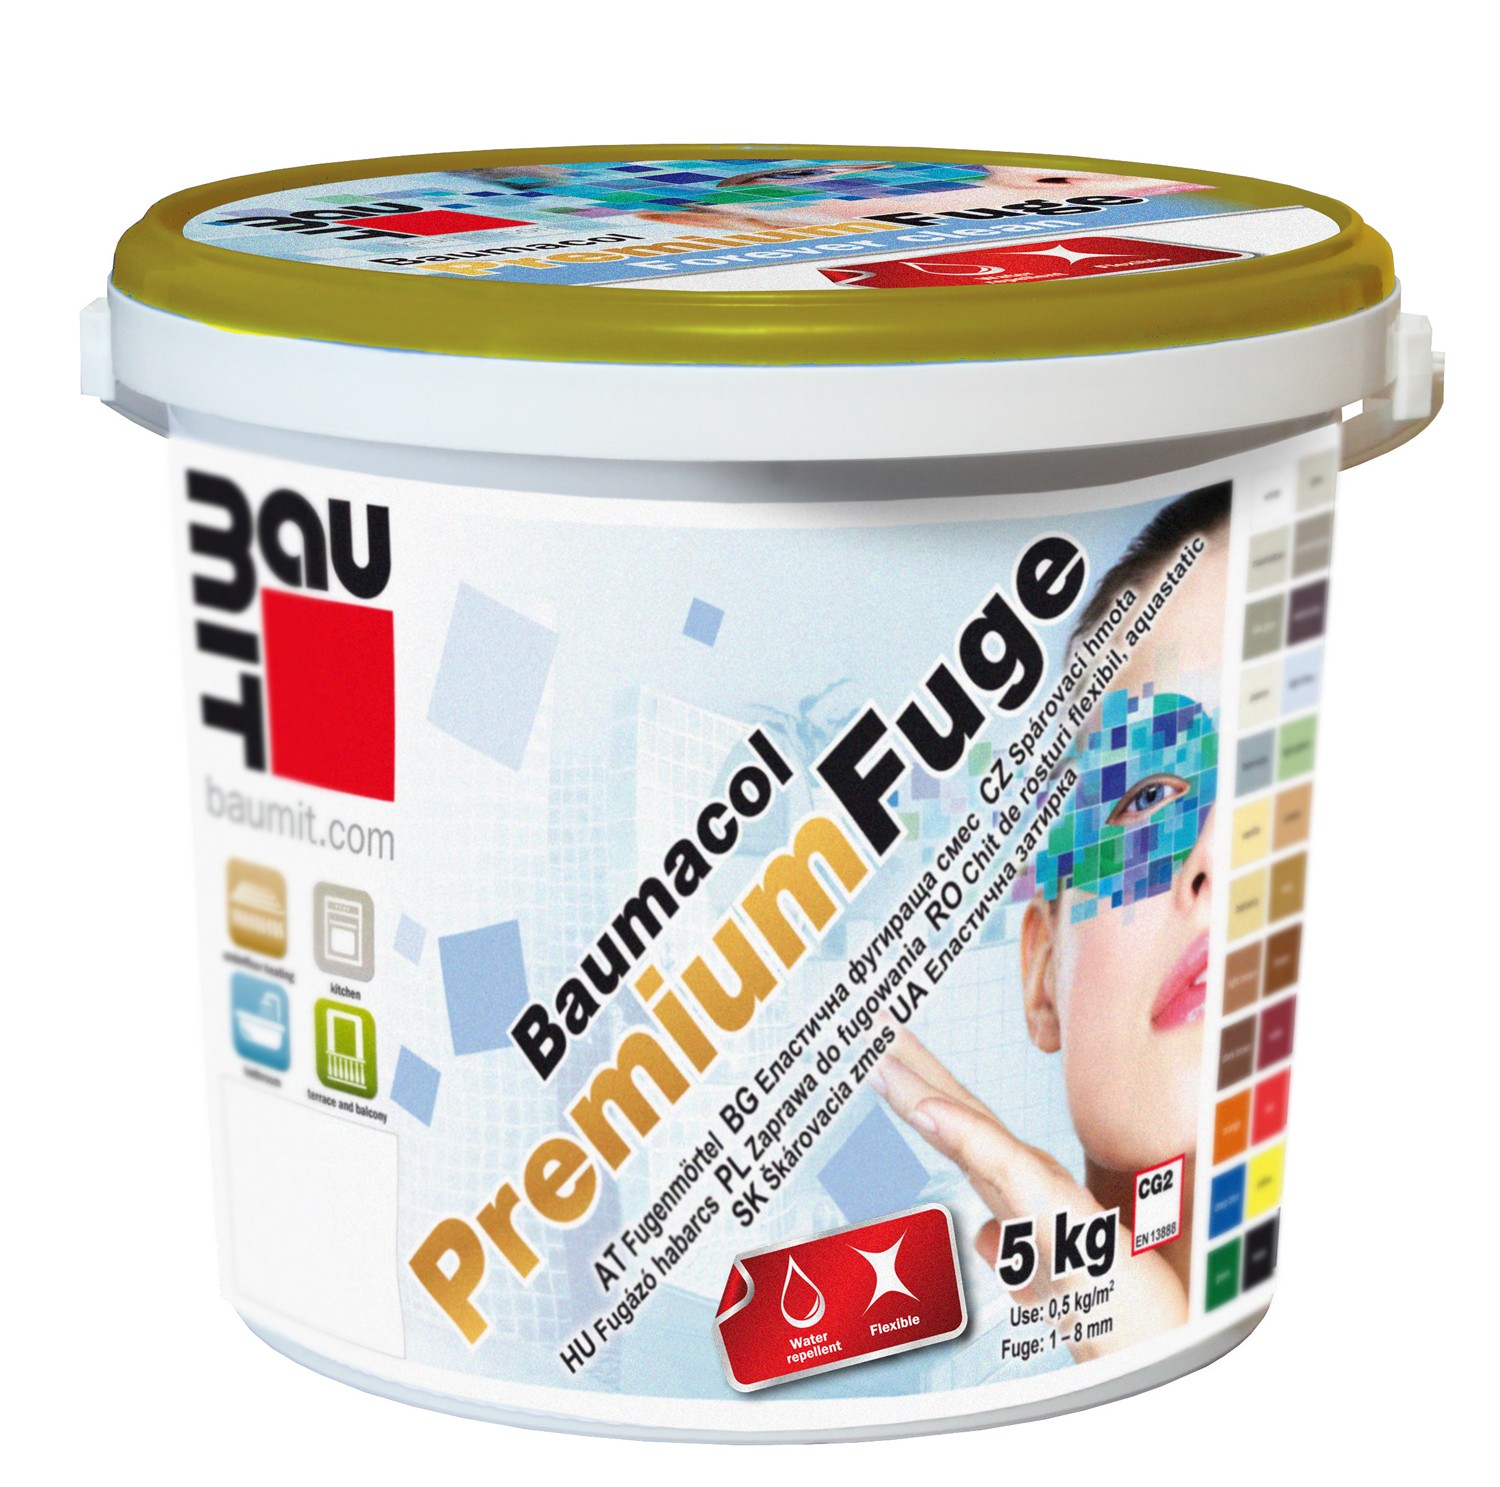 Joints - Baumit PremiumFuge Carbon 5kg joint putty, https:maxbau.ro